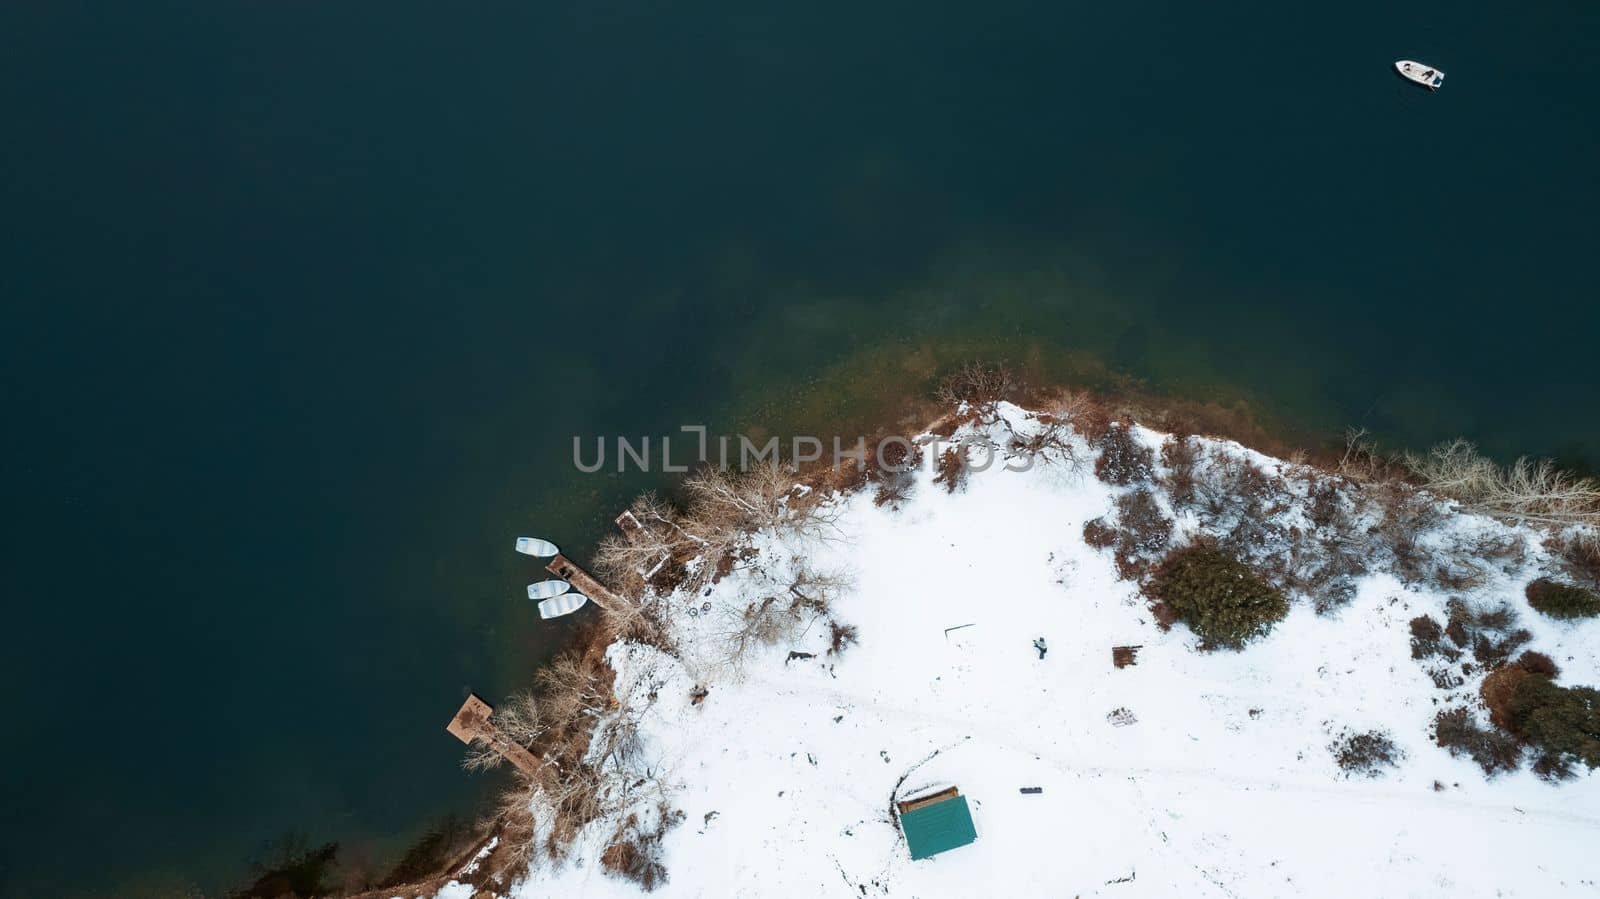 Kolsai mountain lake in the winter forest. Drone view of the pier with boats, trees, clear smooth water, snow lying on the ground. People swim in white boats. Kazakhstan, Almaty